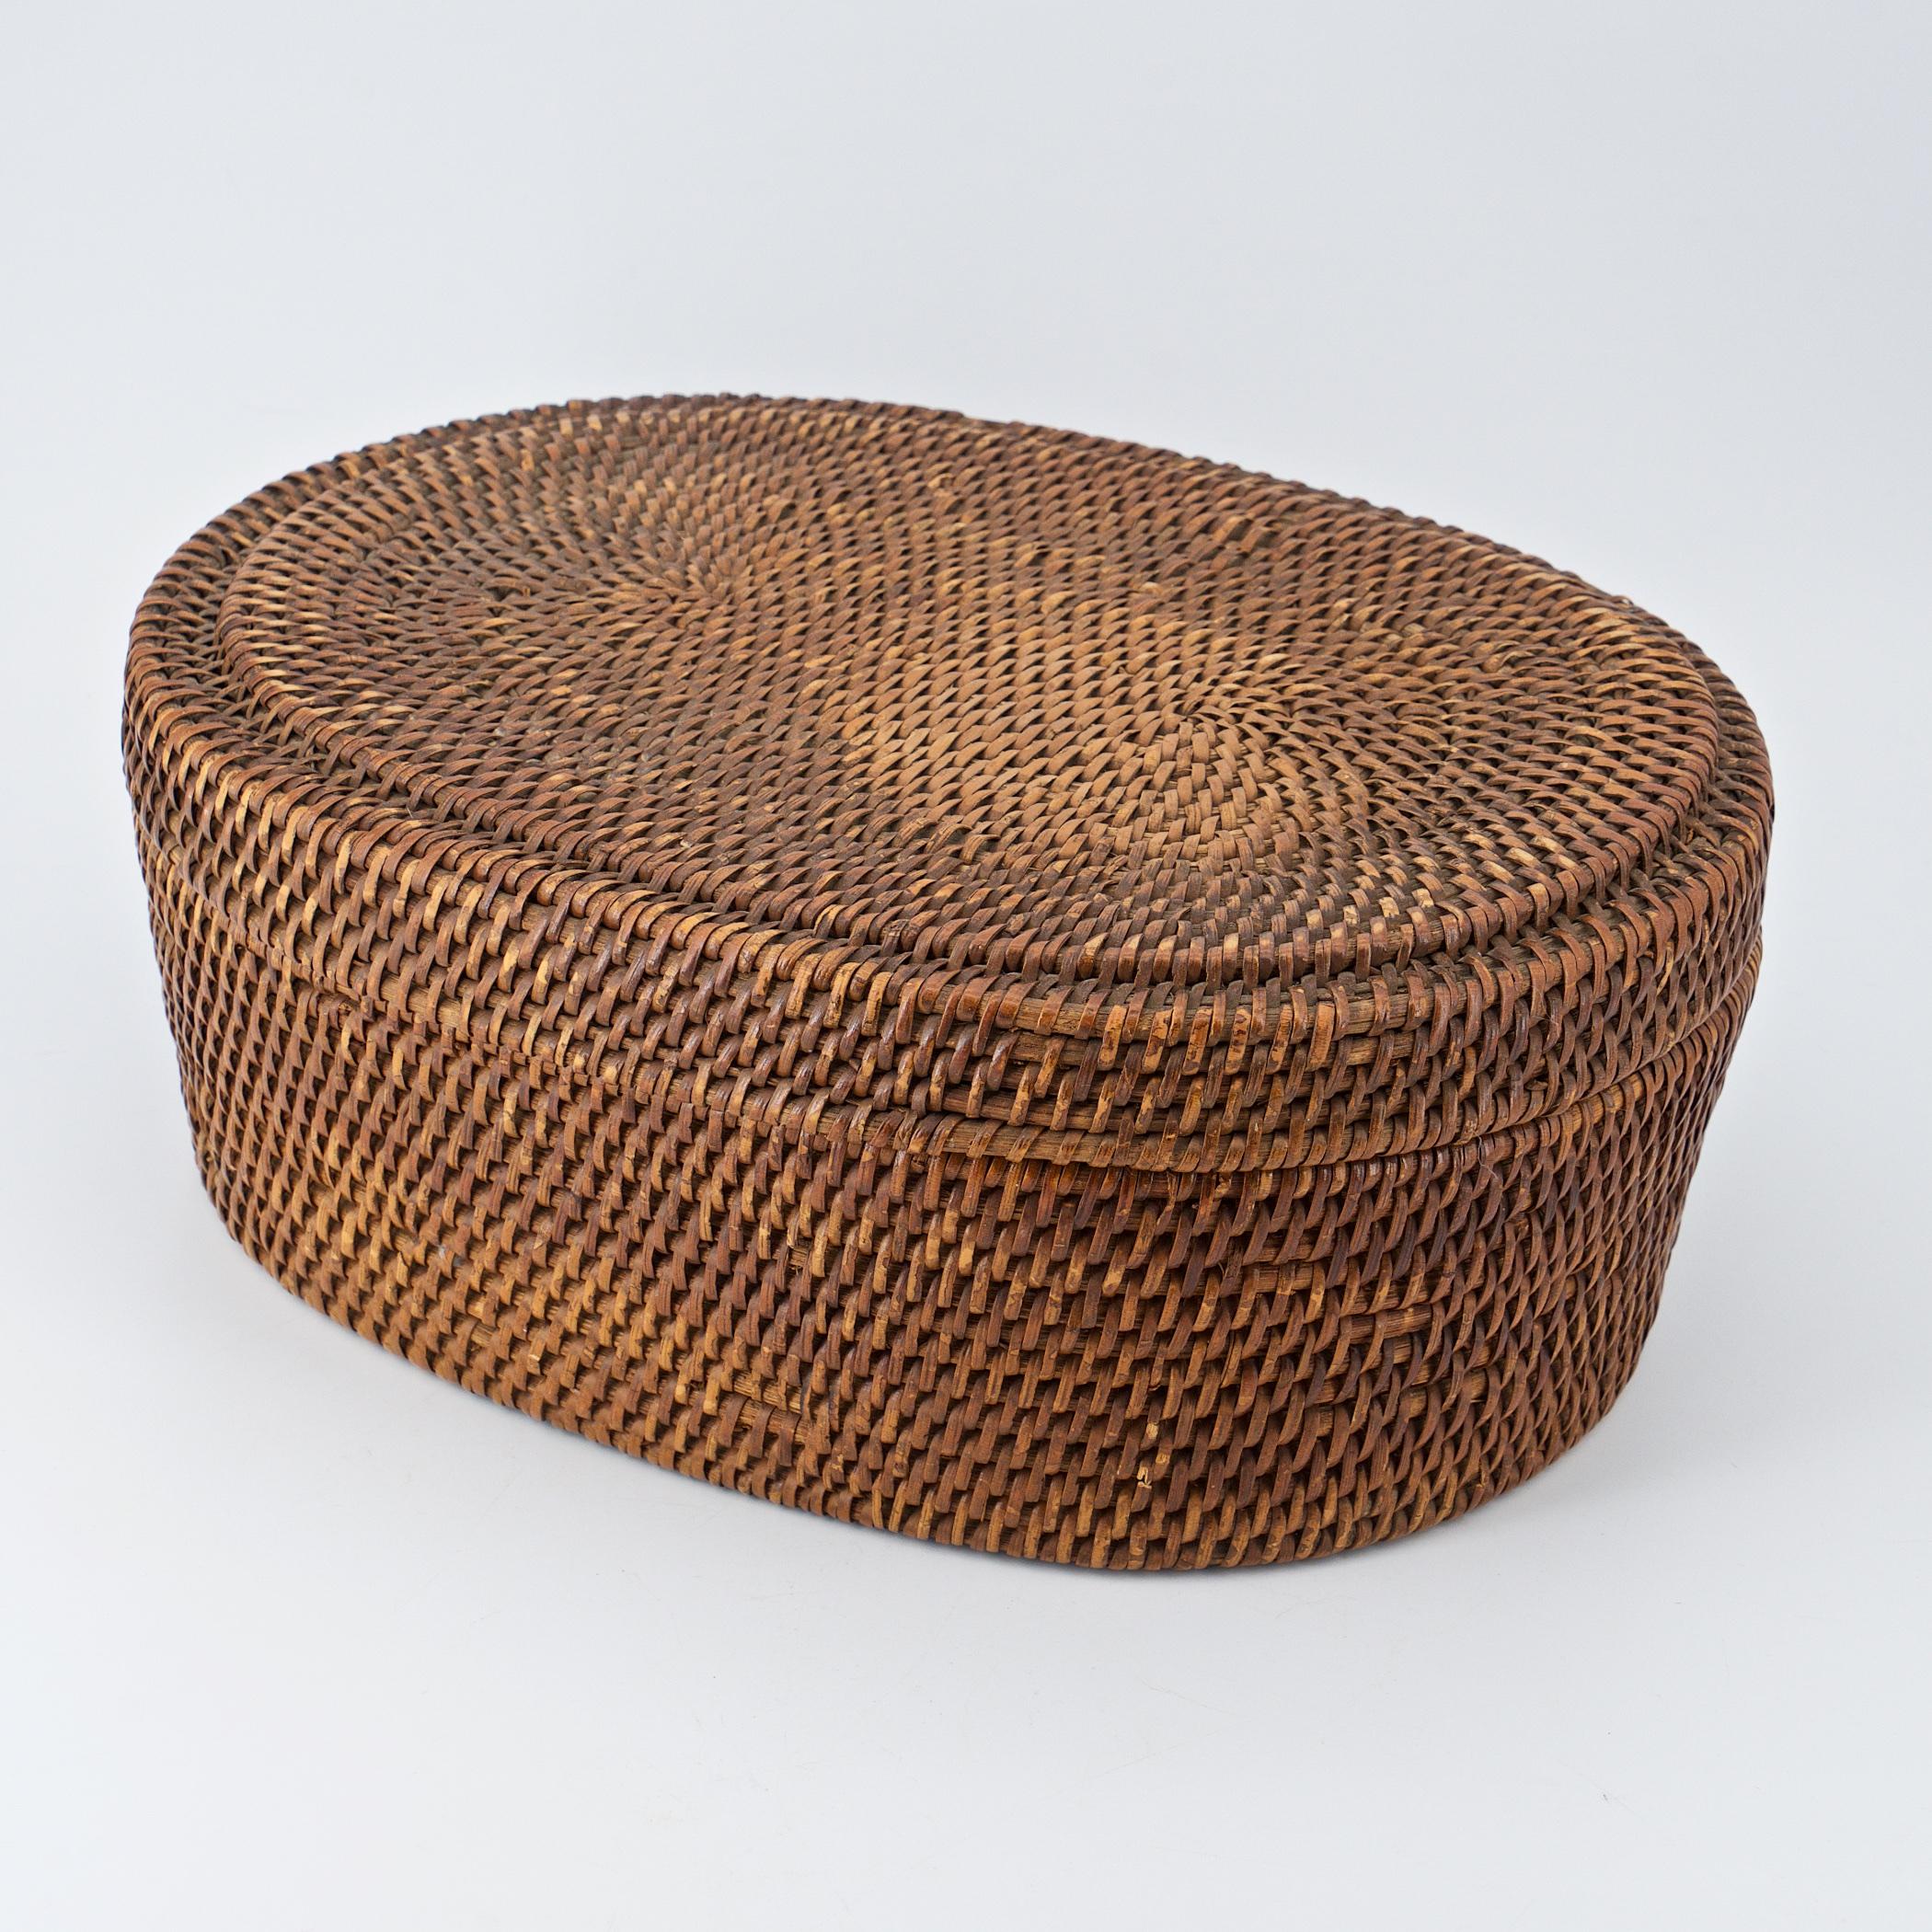 Rattan Native American Indian Woven Coiled Lidded Oval Basket